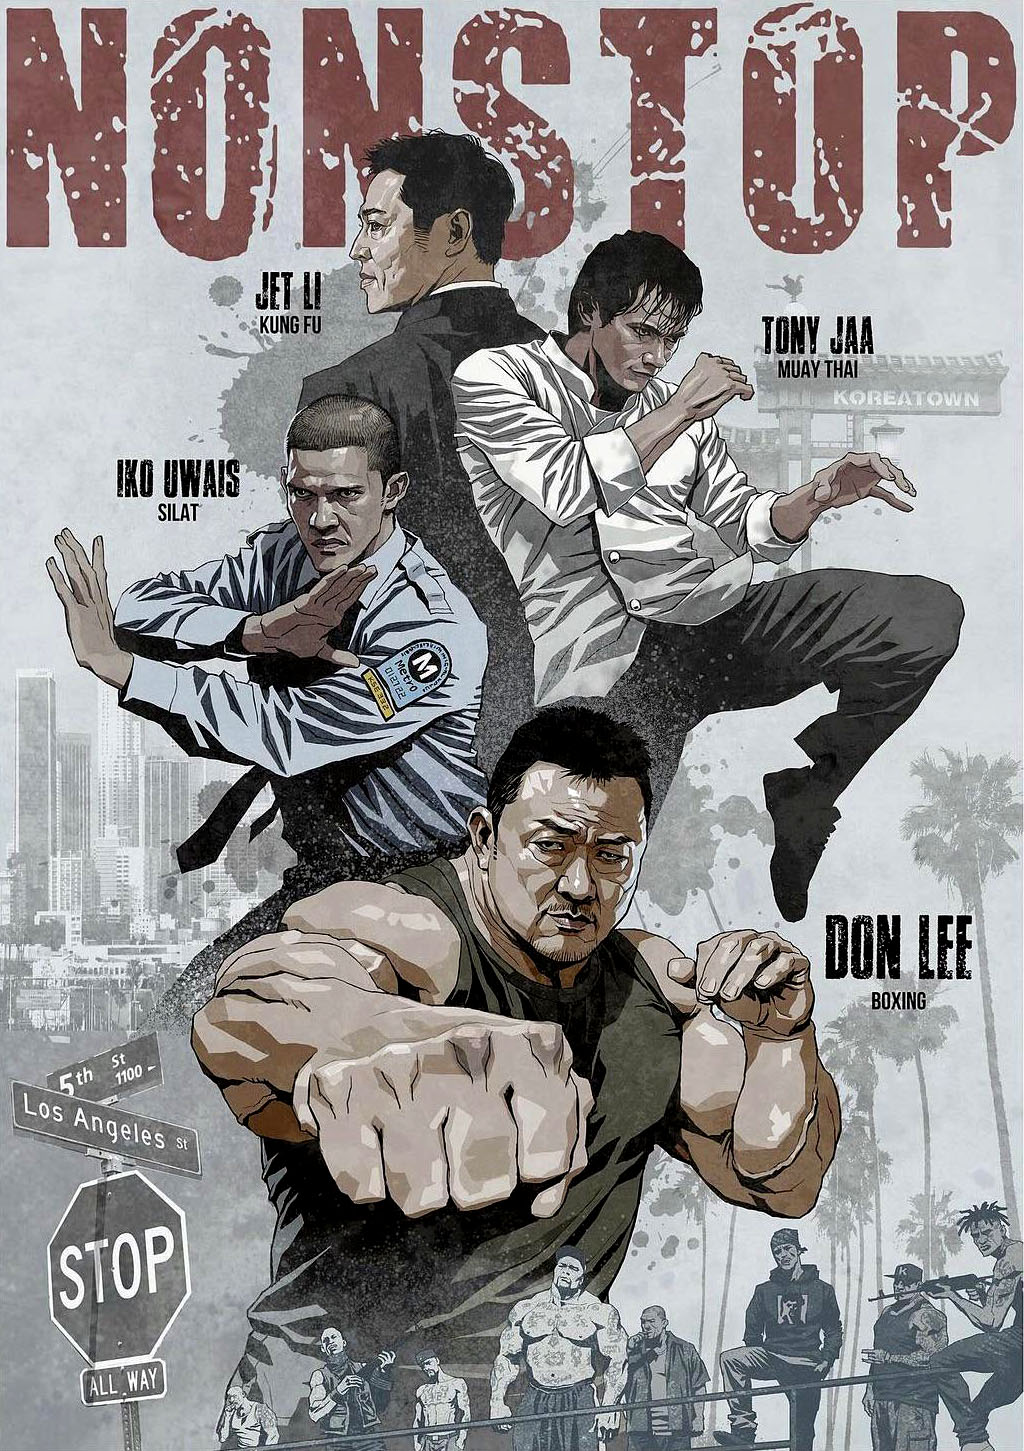 Jet Li to make his return to acting with Don Lee, Iko Uwais, Tony Jaa for  an all-star actioner titled 'Nonstop'?